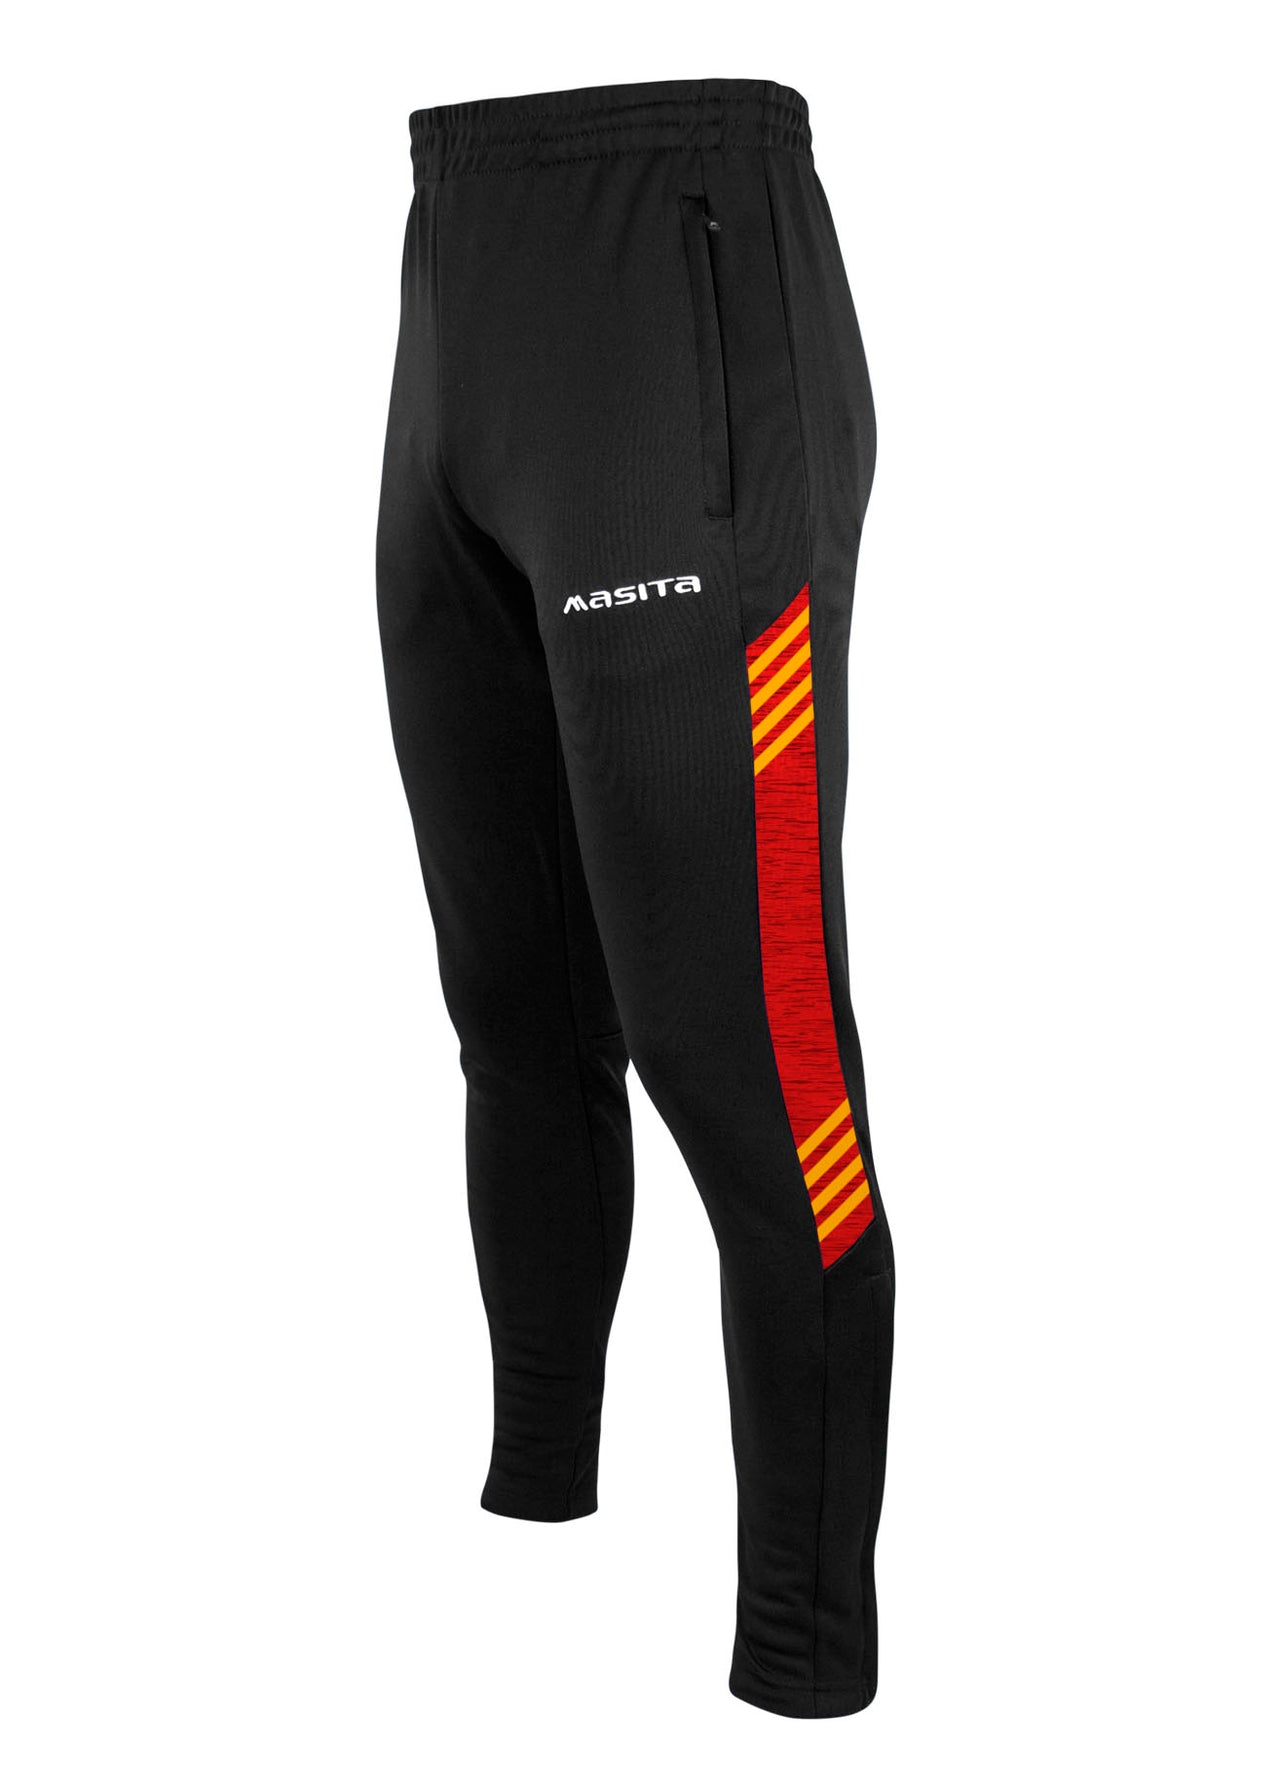 Hydro Skinny Bottoms Black/Red/Amber Adult